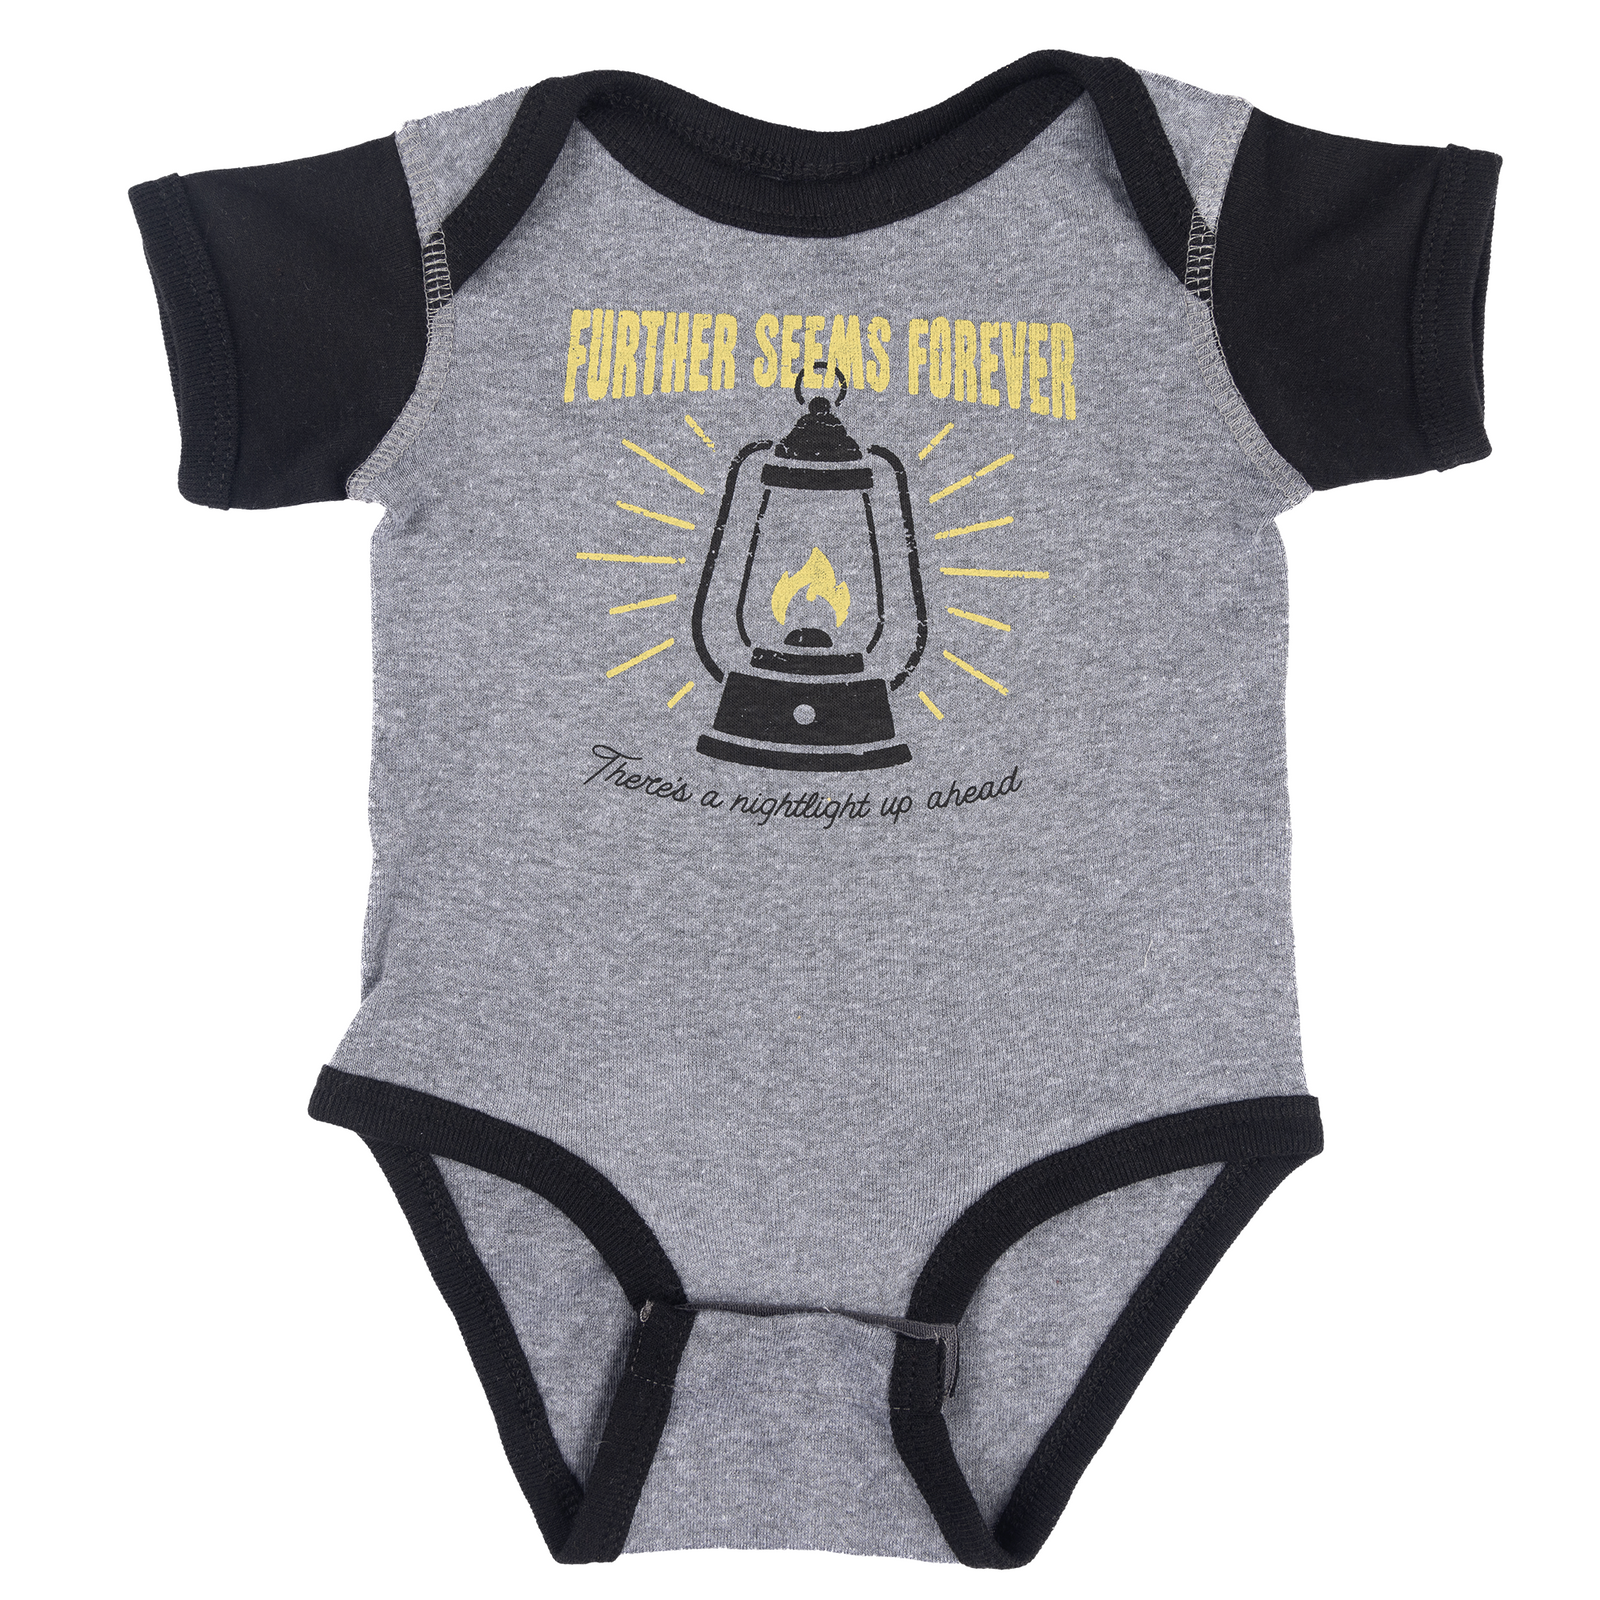 Further Seems Forever Onesie